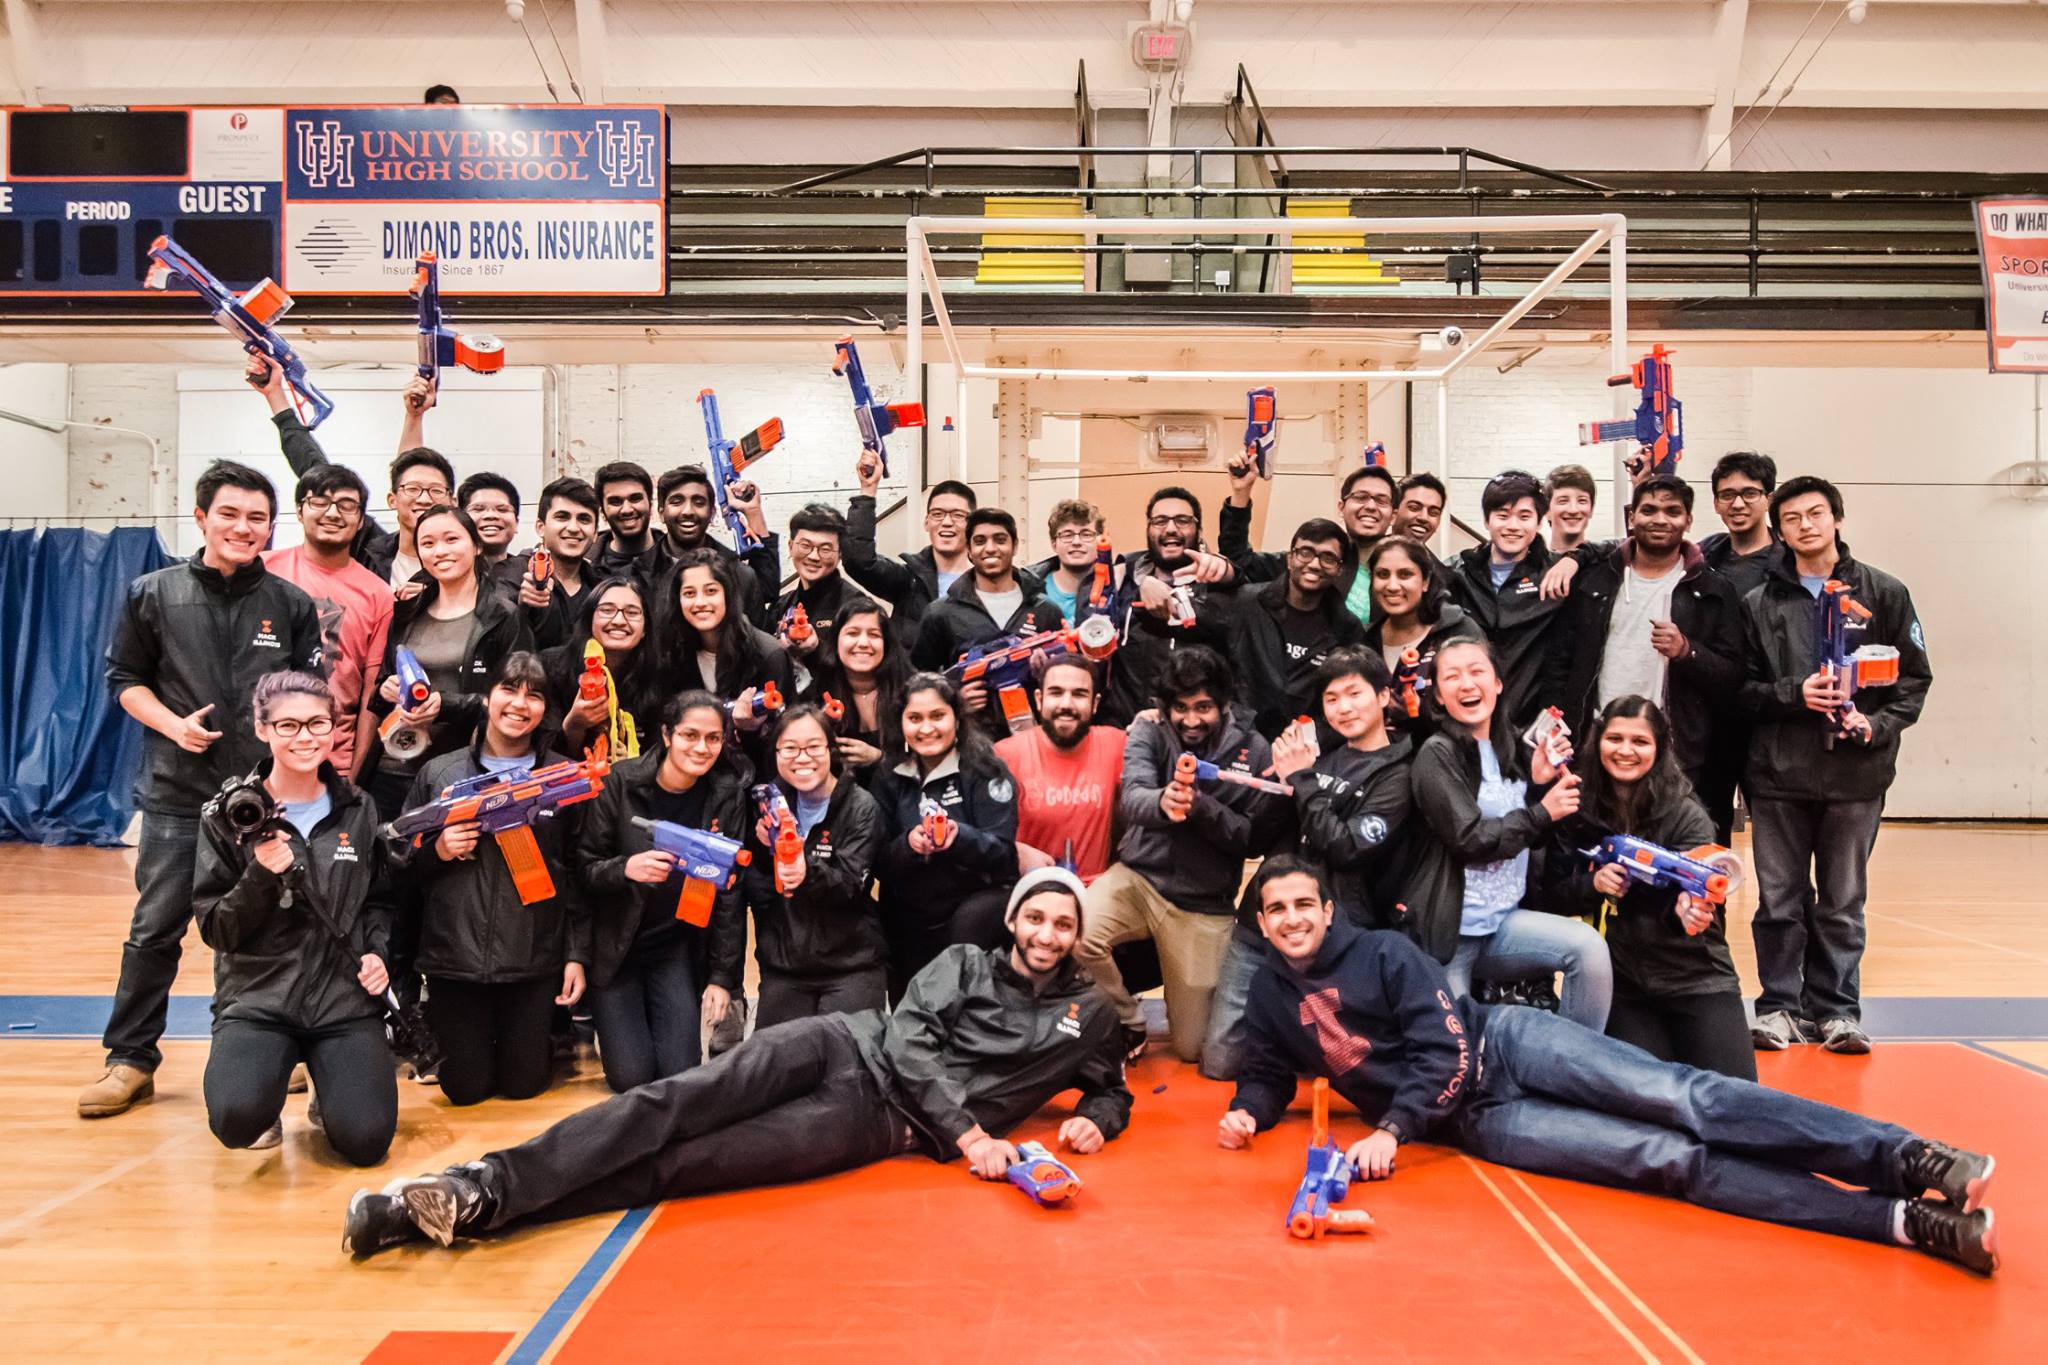 HackIllinois 2017 staff celebrate a successful event at the traditional Staff vs. Sponsors Nerf battle. Photo by HackIllinois 2017 Staff Photographers.